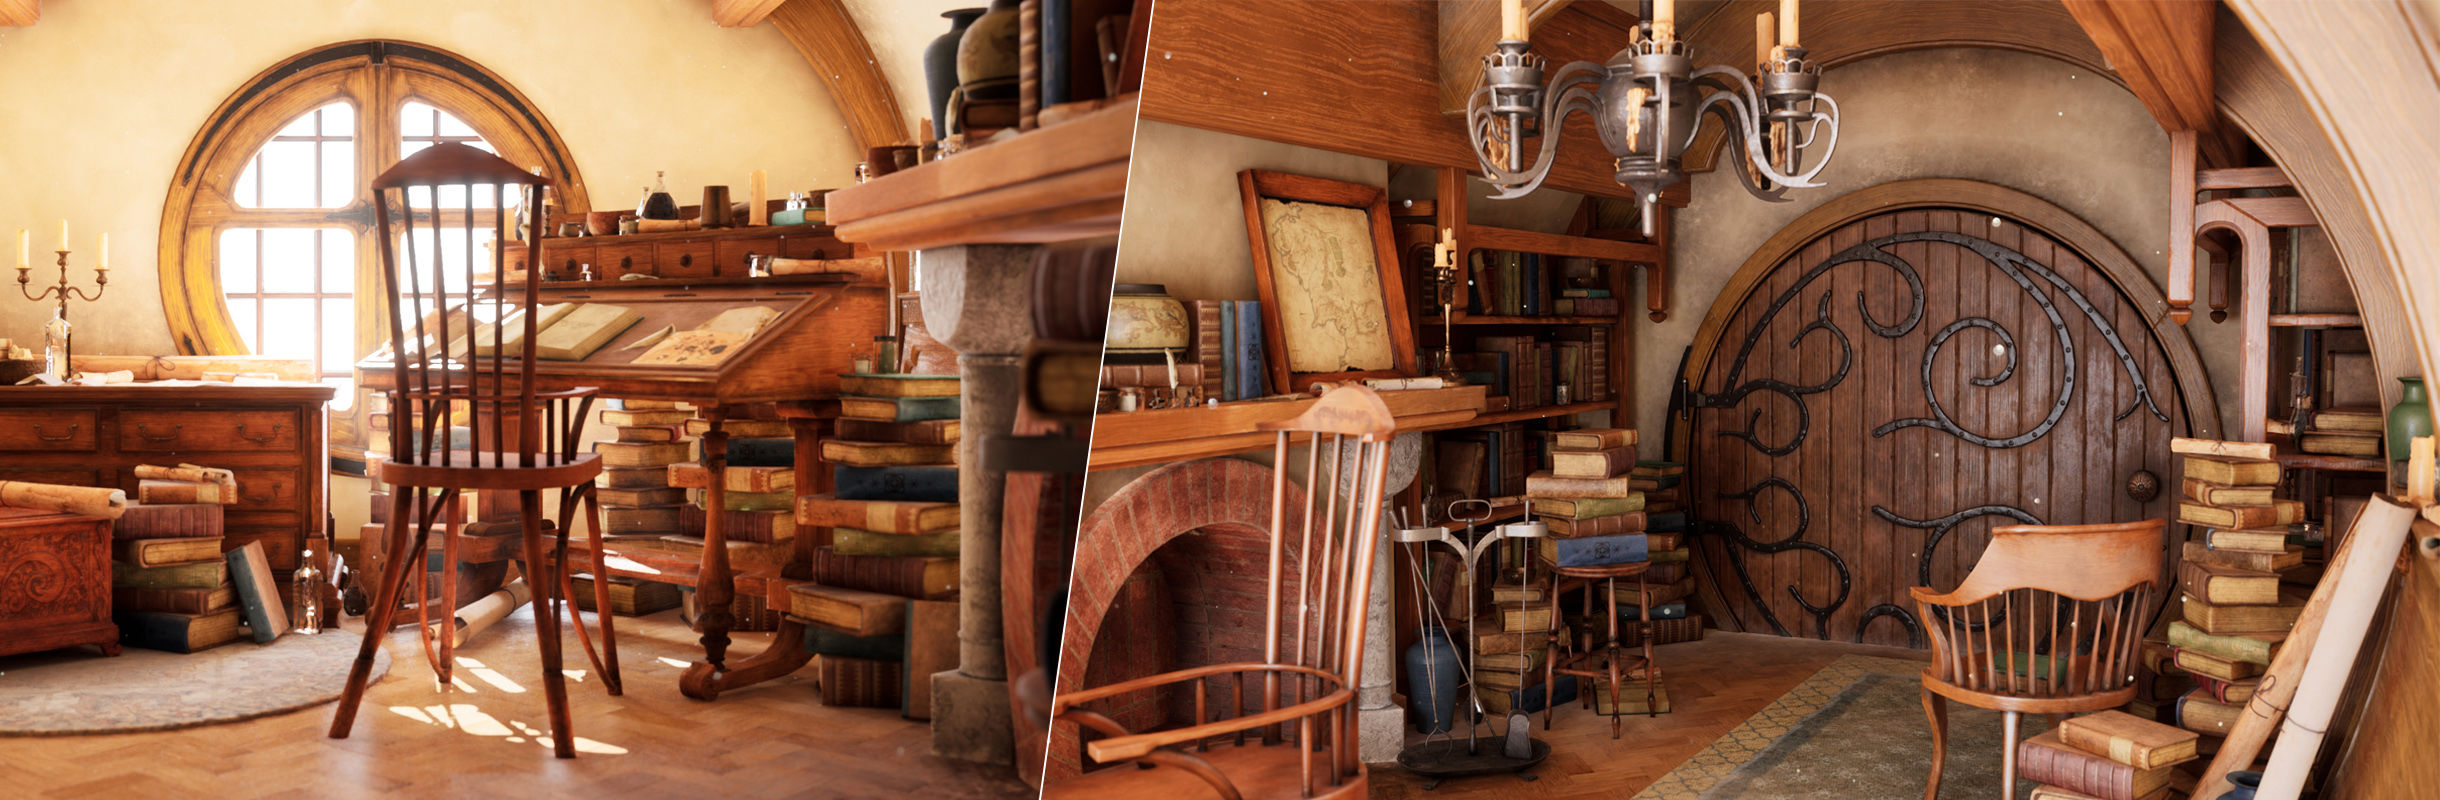 A Hobbit House {If I Lived Here} - The Inspired Room